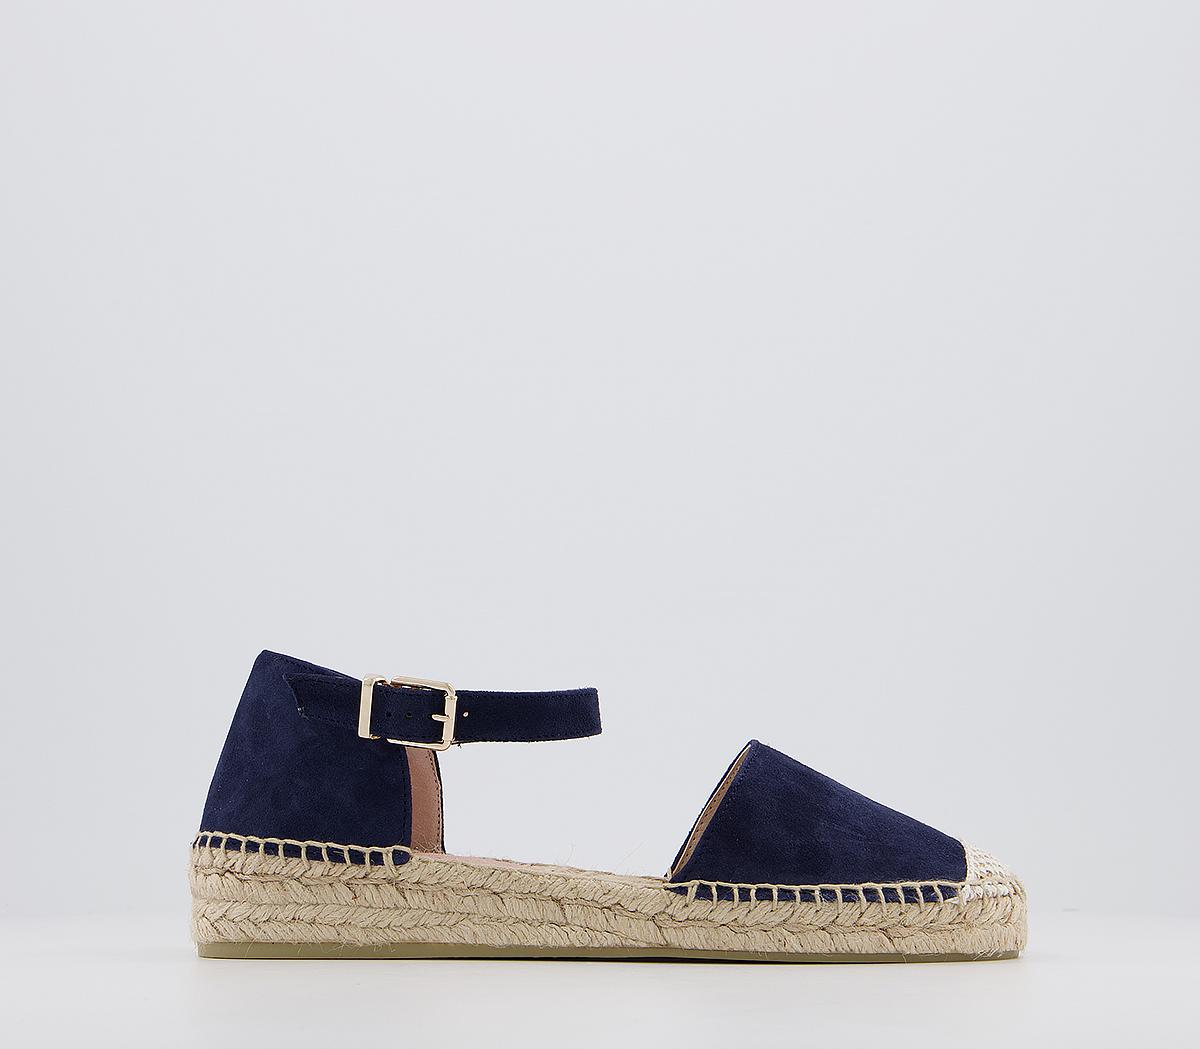 OFFICEFresno Two Part EspadrillesNavy Suede